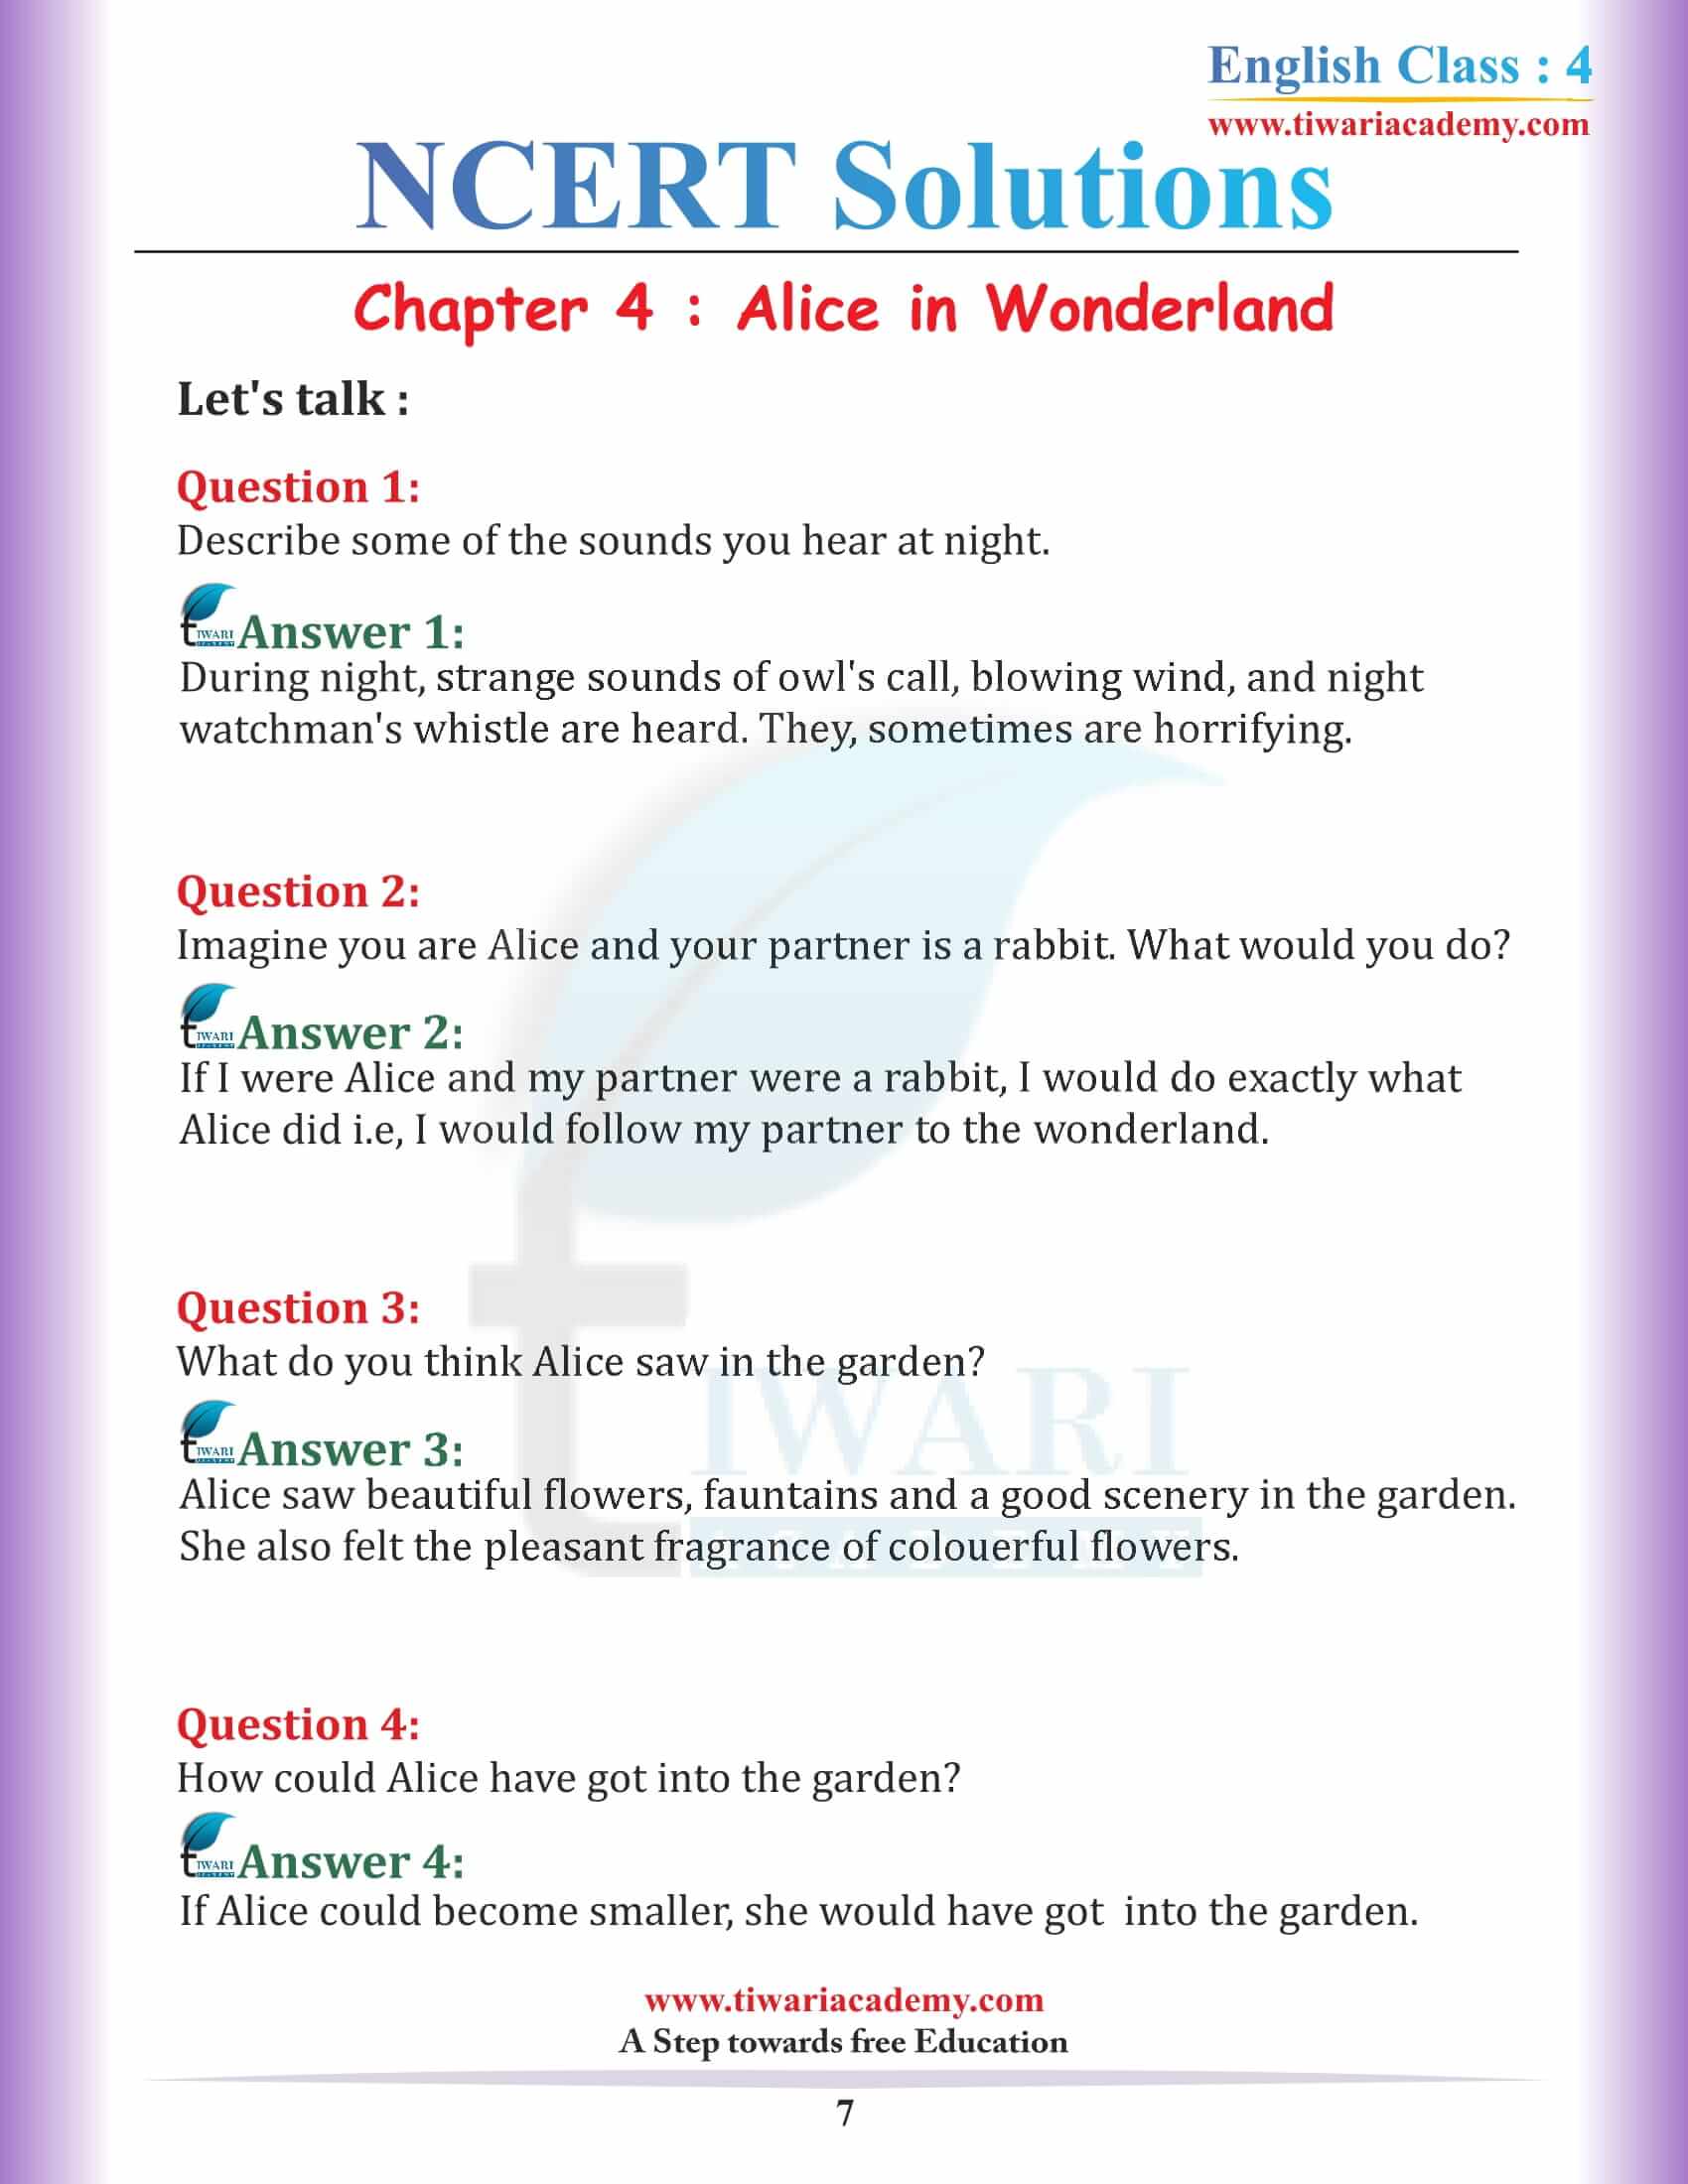 Class 4 English Unit 4 NCERT Solutions answer